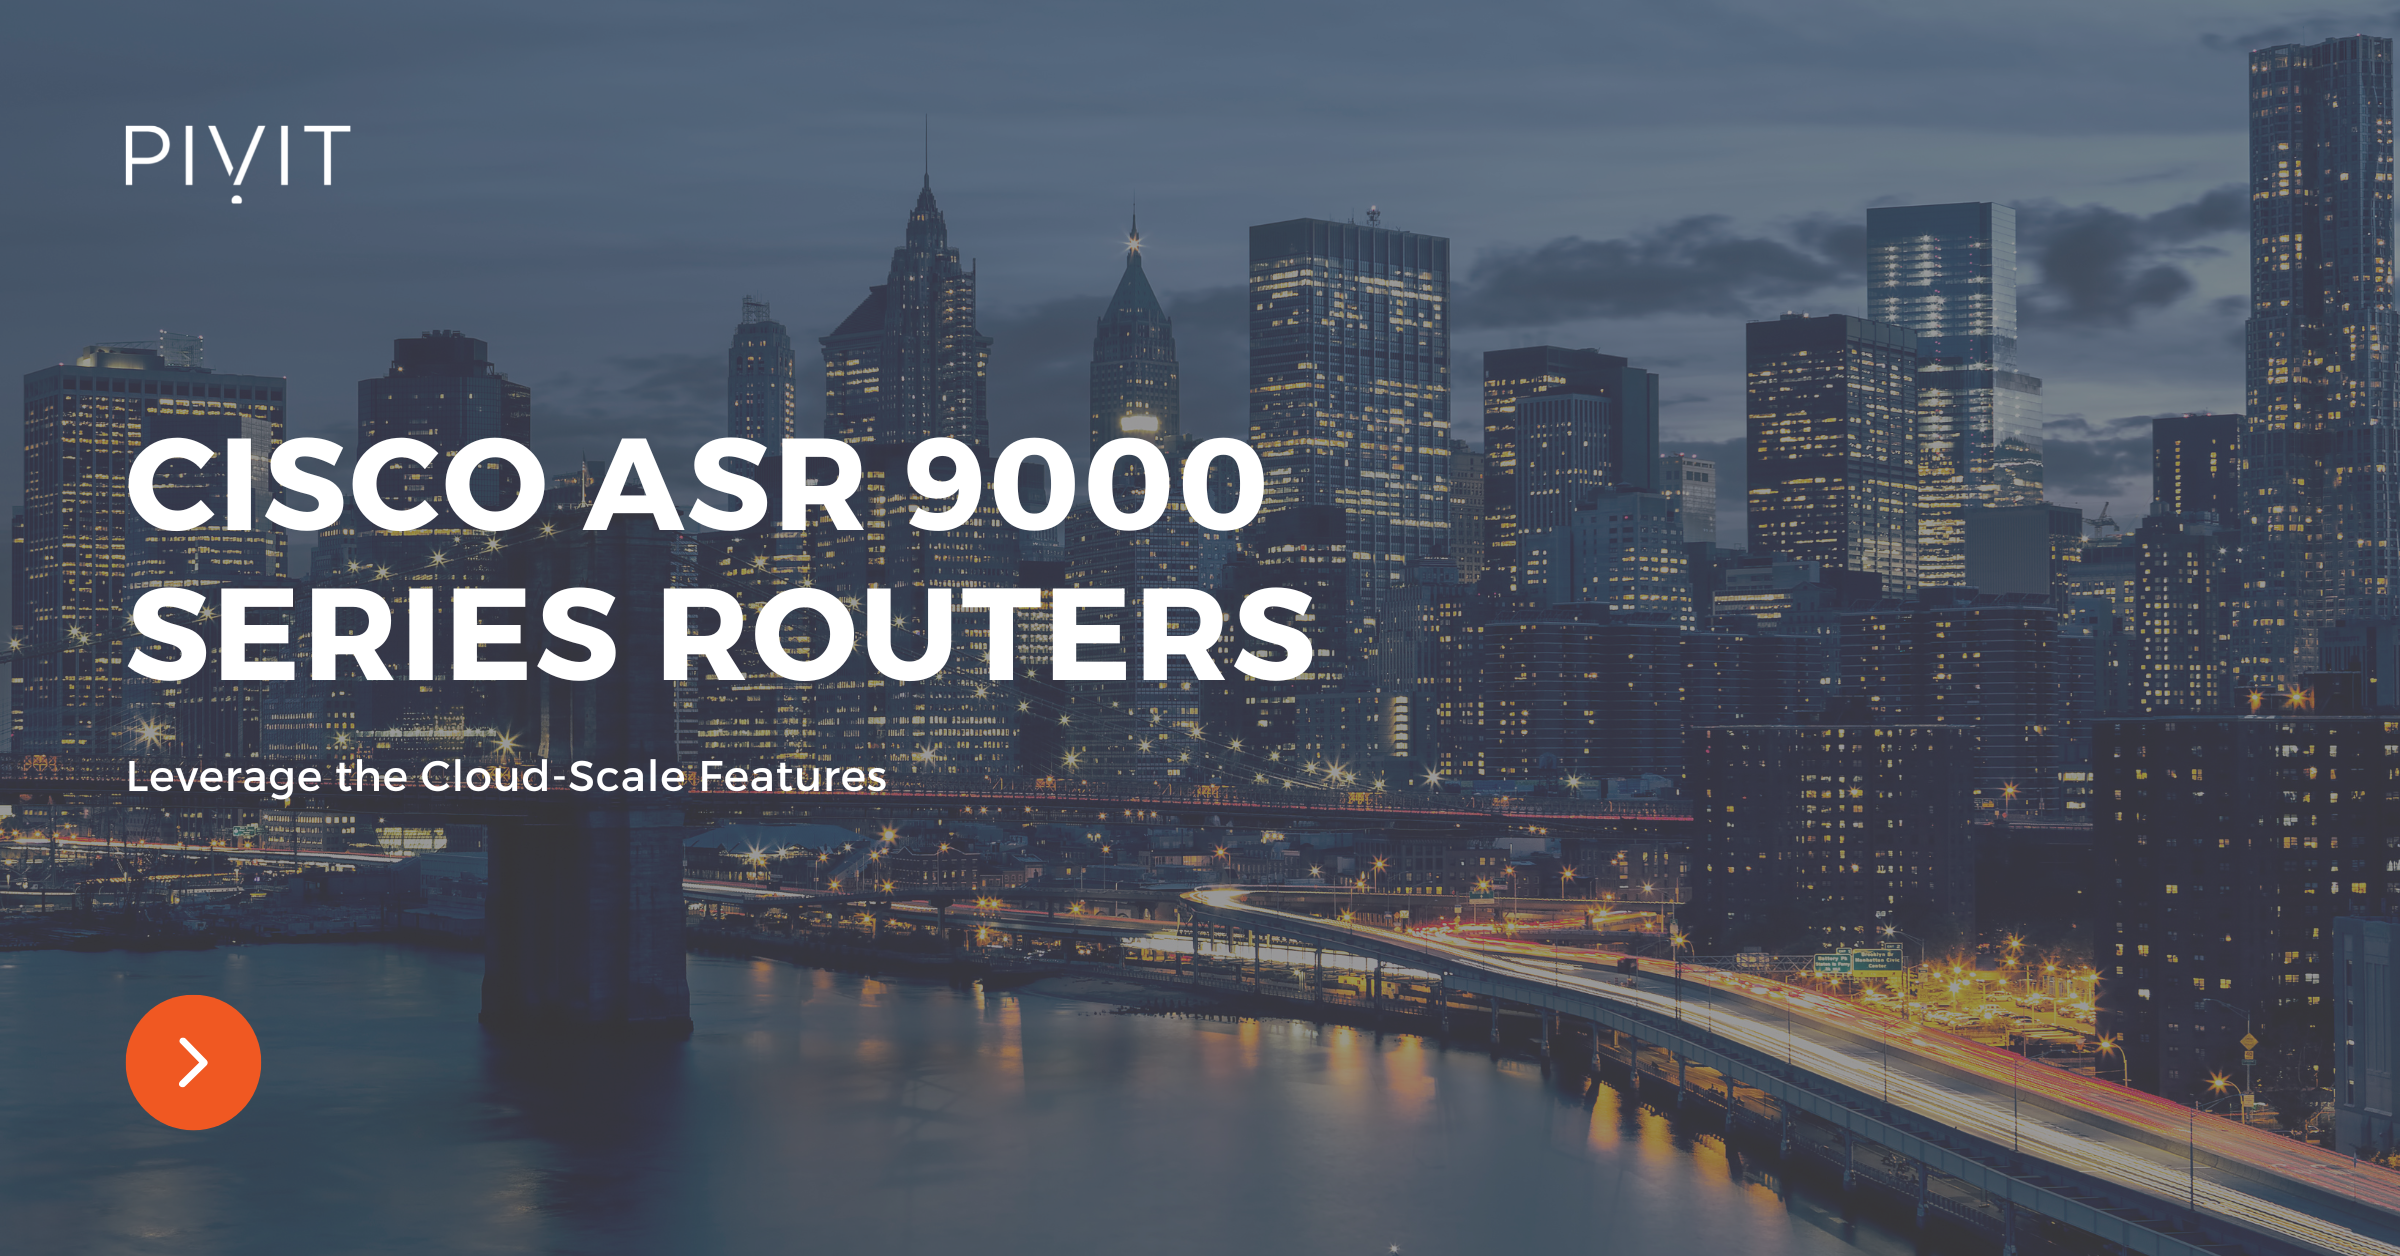 Leverage Cloud-Scale Features Offered by Cisco ASR 9000 Series Routers